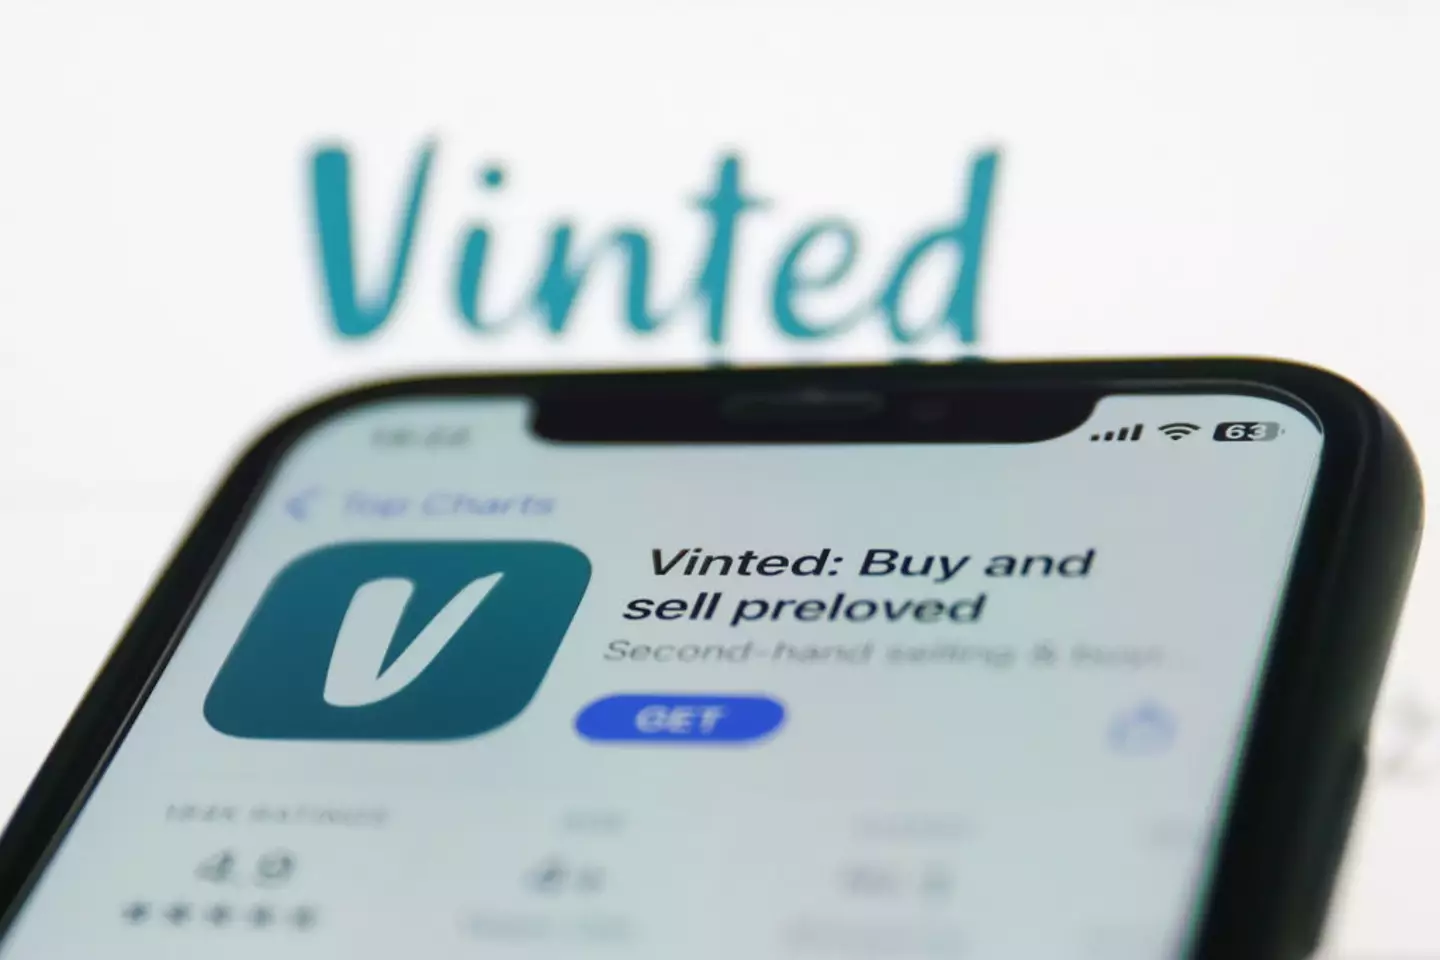 Make a big pile of cash on Vinted? You might need to tell the taxman.